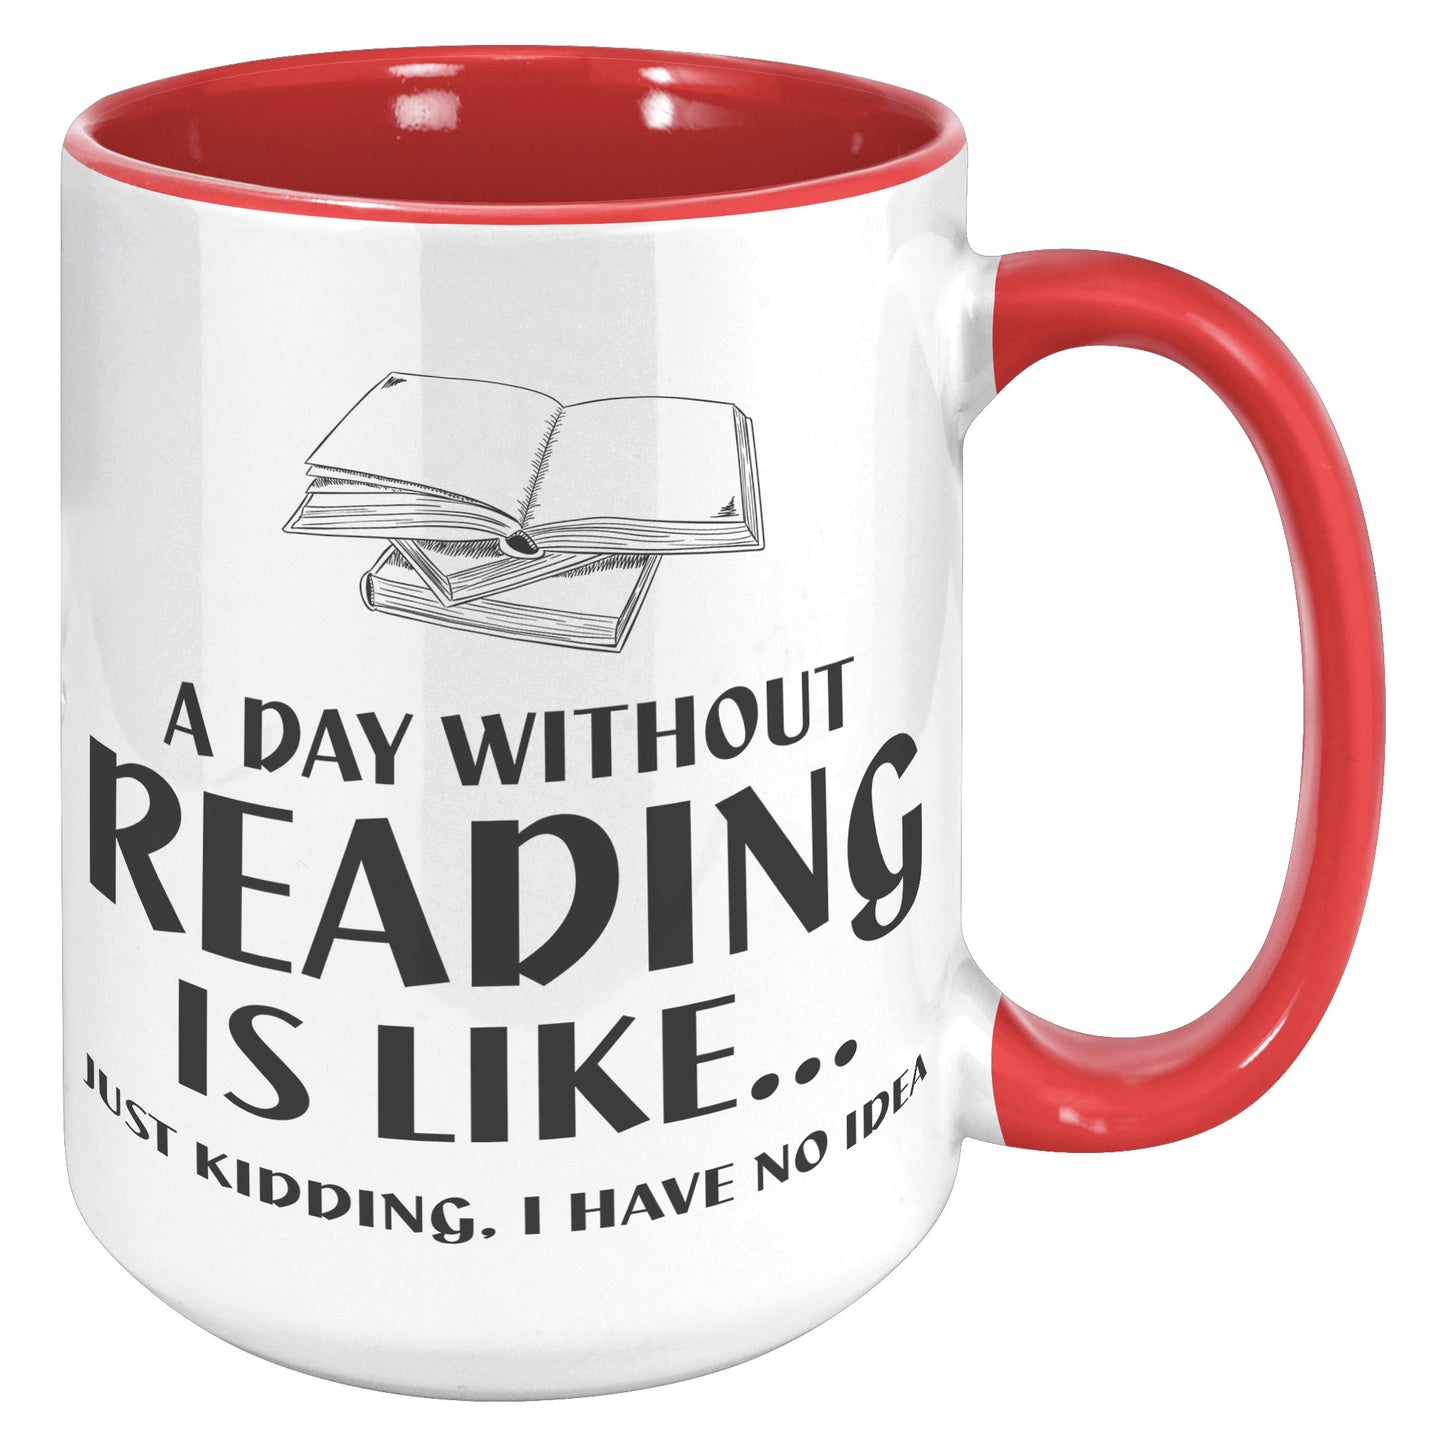 A Day Without Reading Is Like... Just Kidding, I Have No Idea | Accent Mug